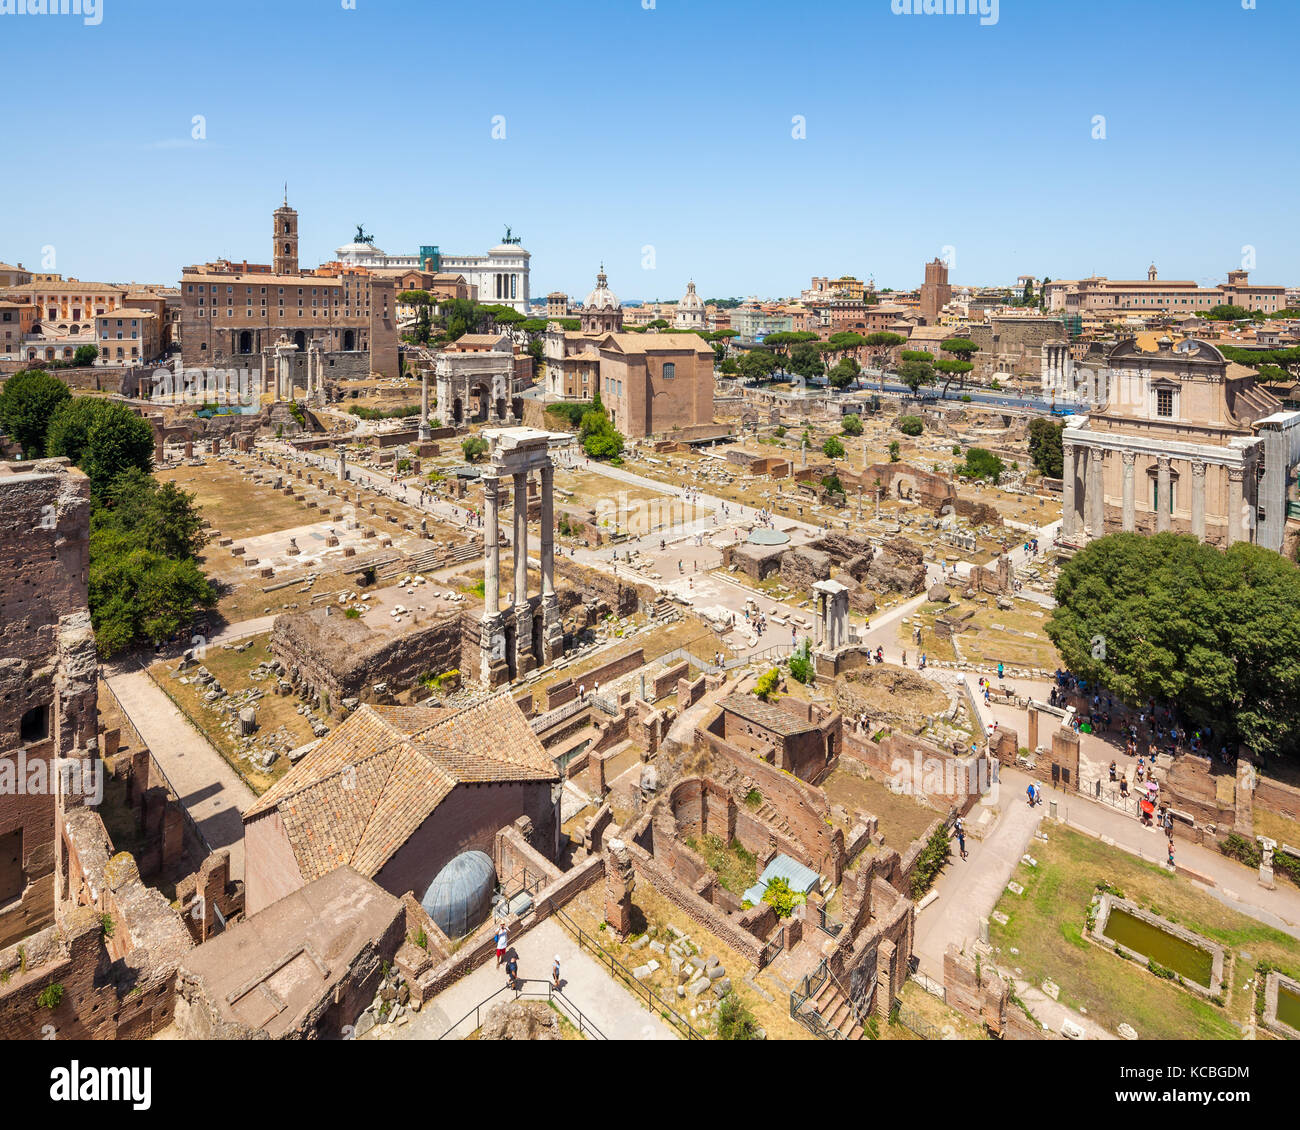 View of Roman Forum looking north, Rome, Italy Stock Photo